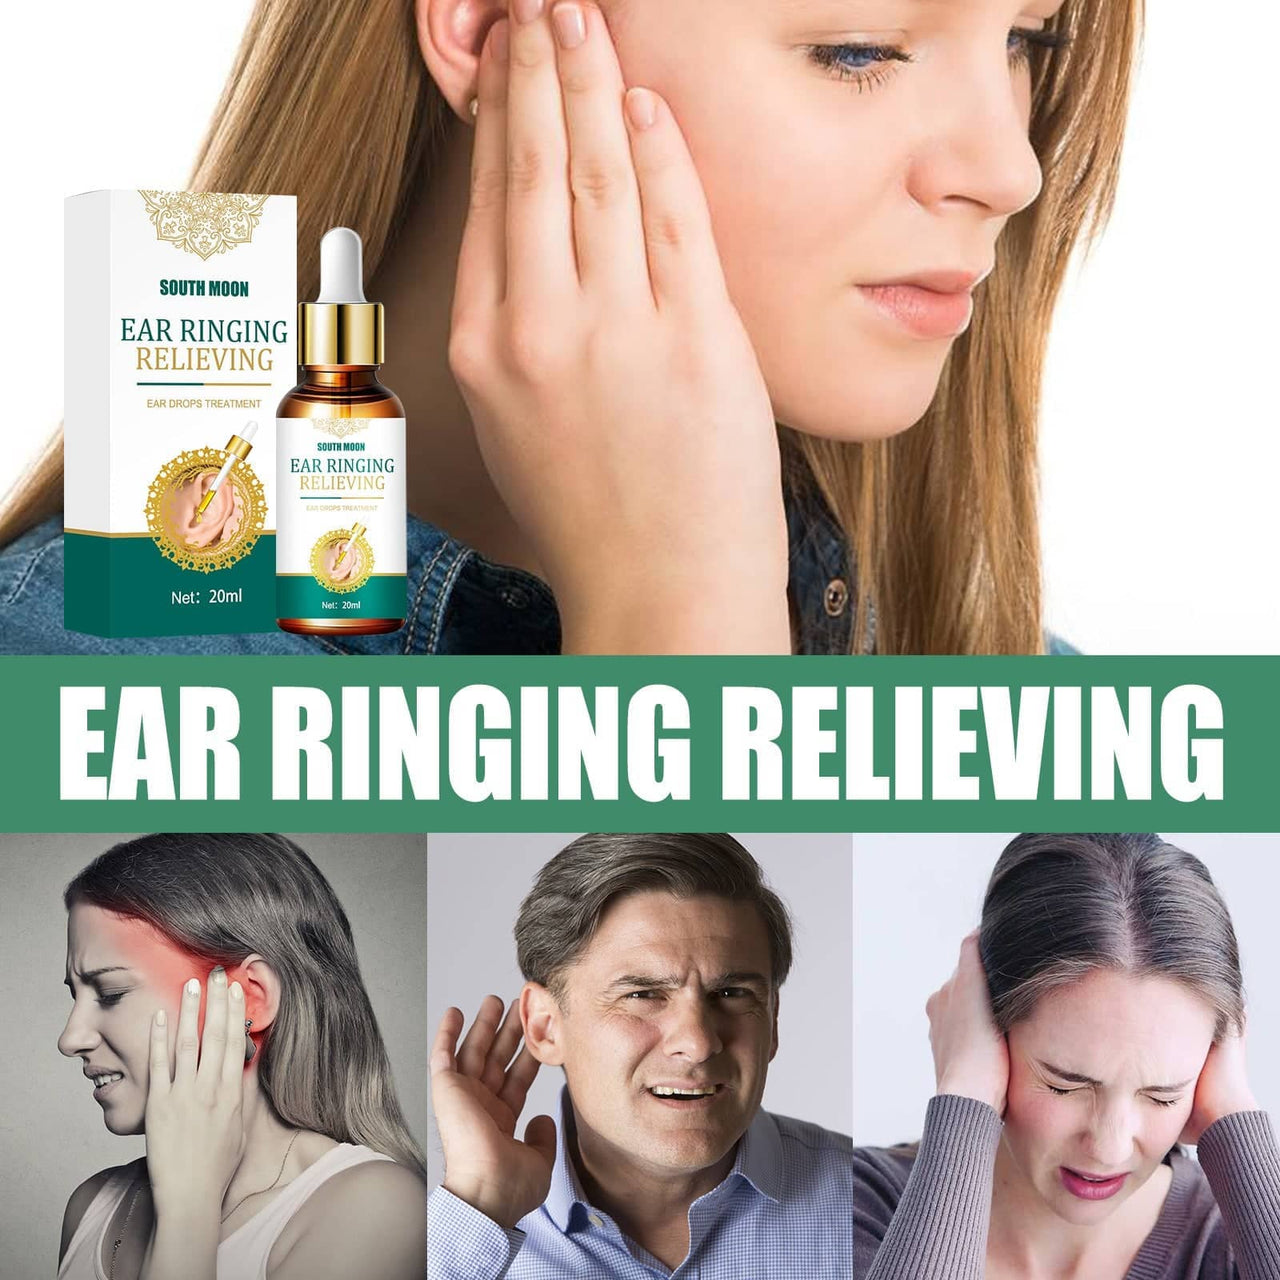 All-Natural Tinnitus Relief Ear Drops (Buy 1 Get 1 Free)